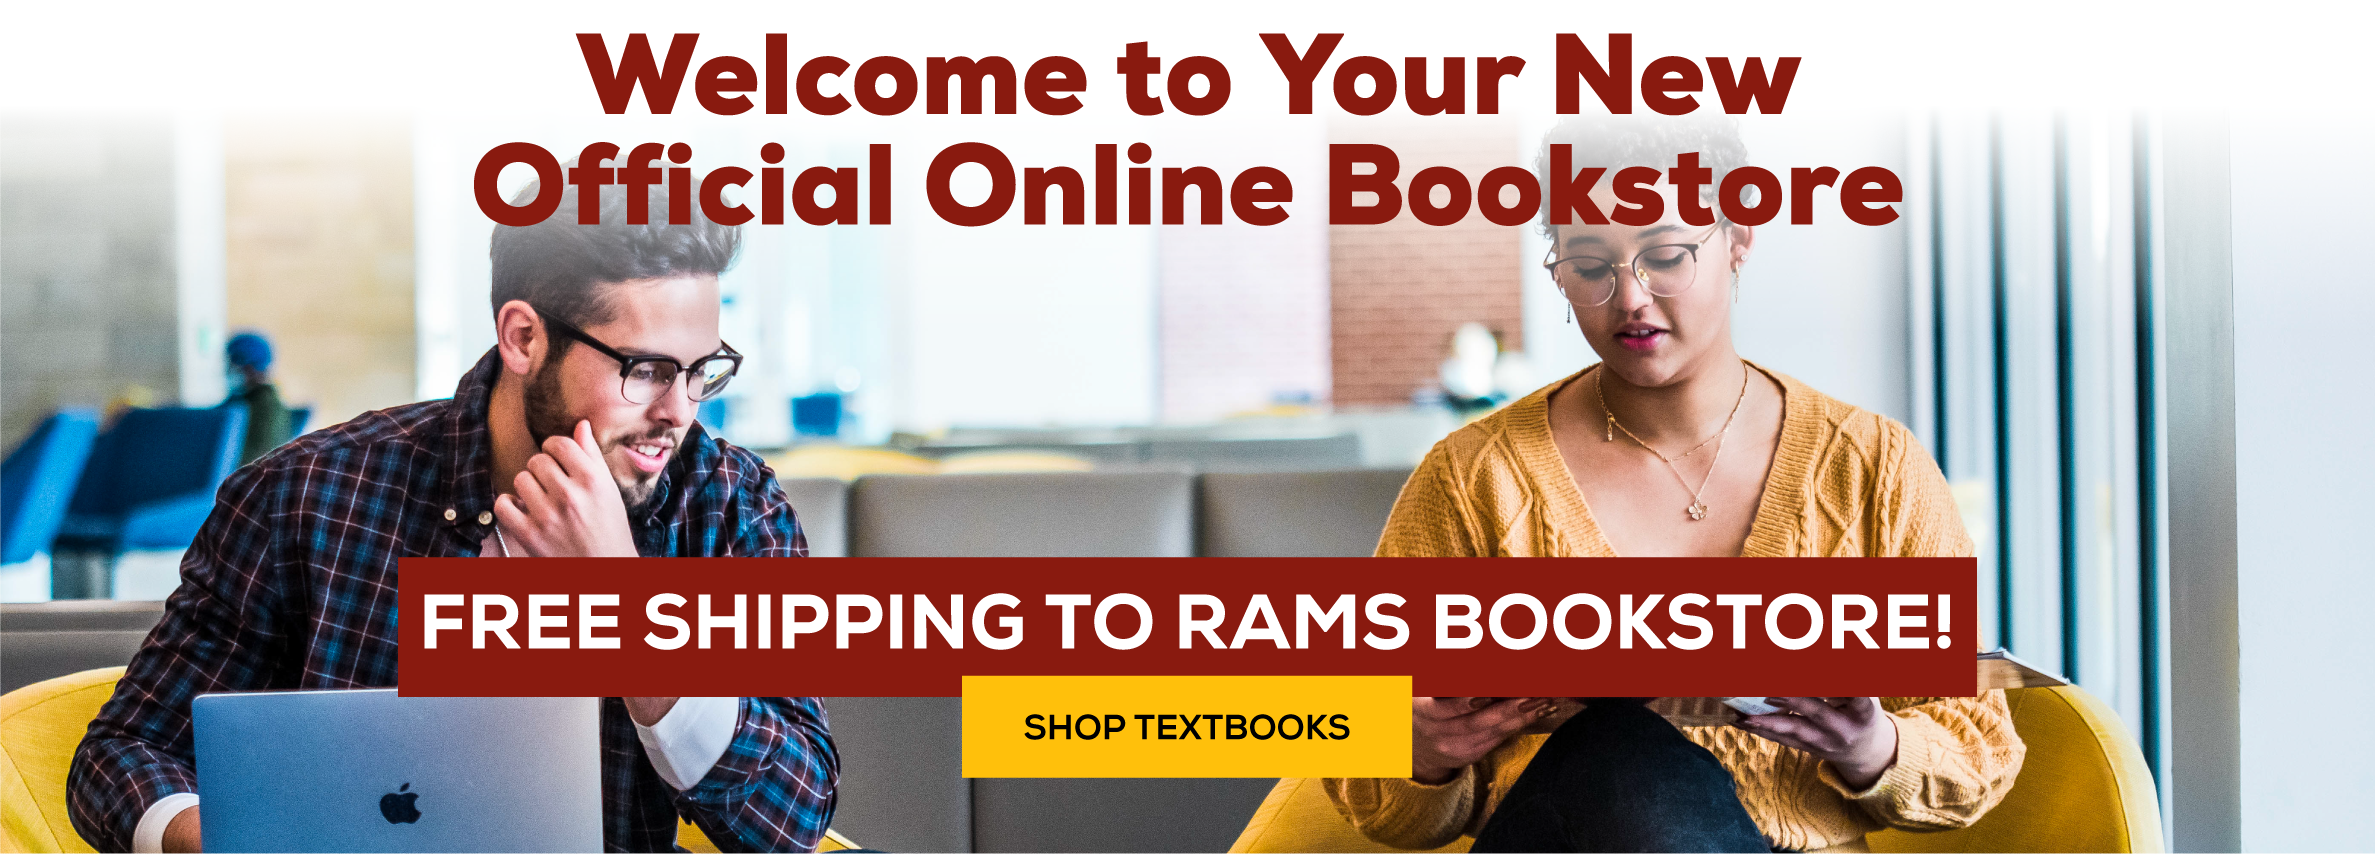 Welcome to Your Official Online Bookstore.  Free Shipping to Rams Bookstore. *Excludes Marketplace Purchase. Shop Textbooks.